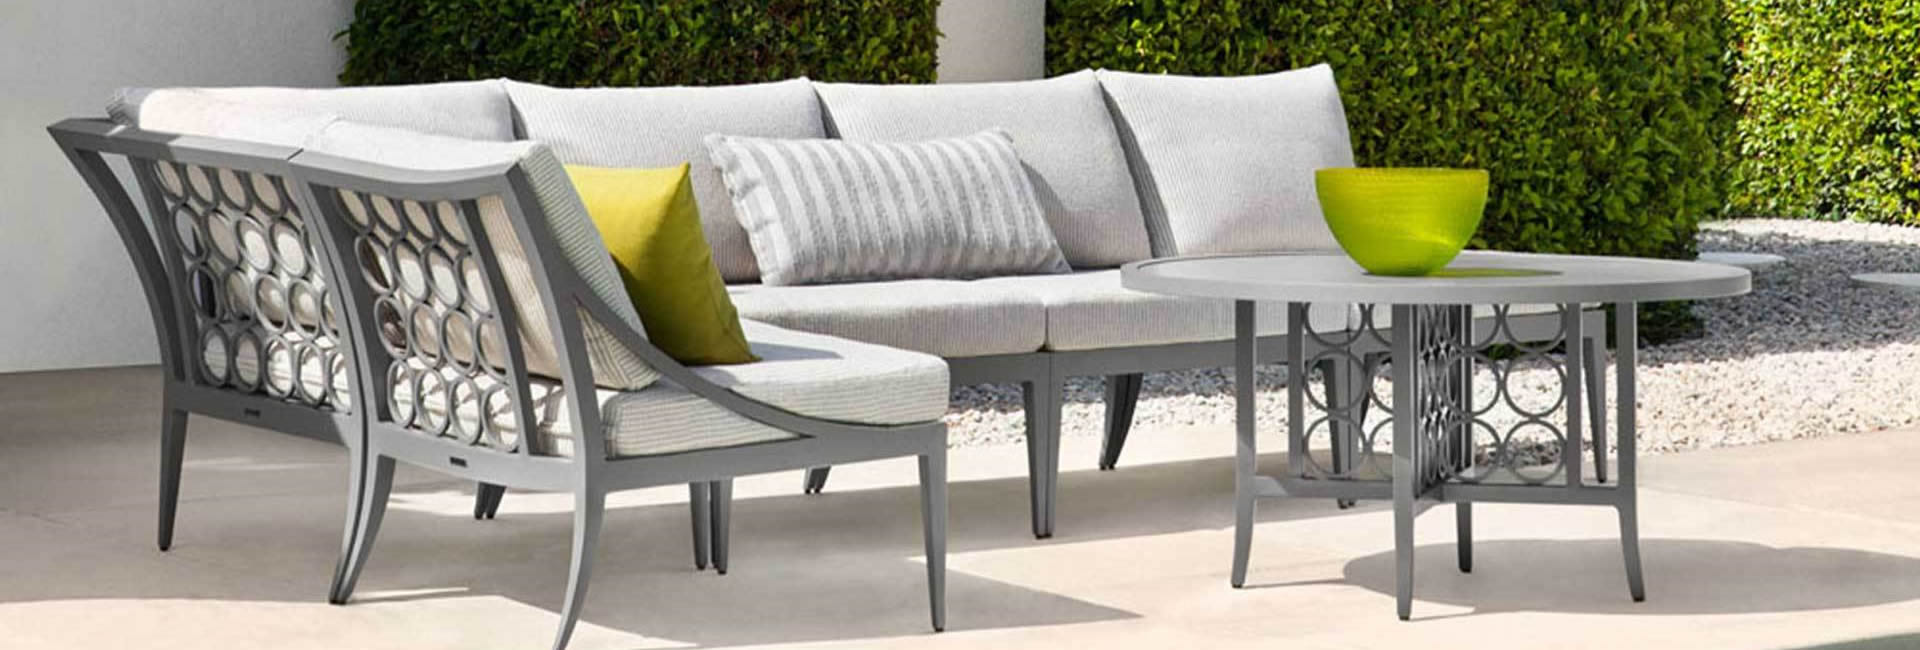 Outdoor Furniture Sale Clearance - Sale > Outdoor Sectional Clearance ...